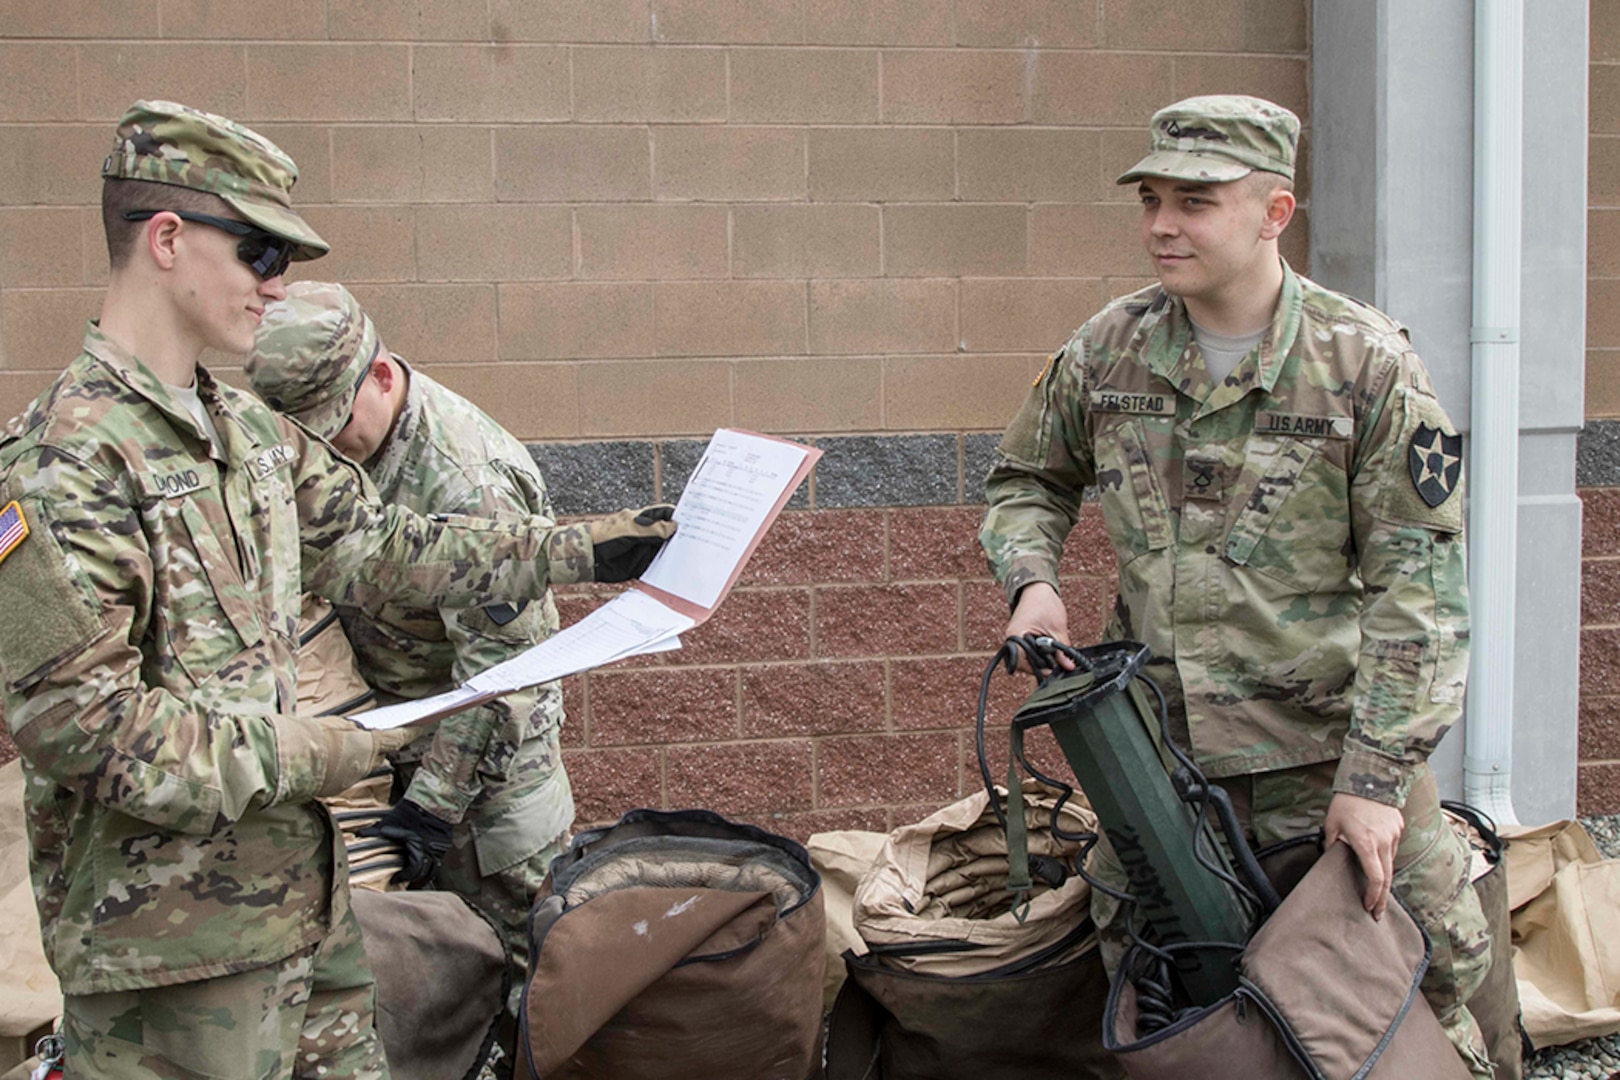 Spc. Aaron Dumond (left), a team leader with D Company, 23rd Brigade Engineer Battalion, 1-2 Stryker Brigade Combat Team, reads off a list of required items needed for turning in their Deployable Rapid Assembly Shelter.